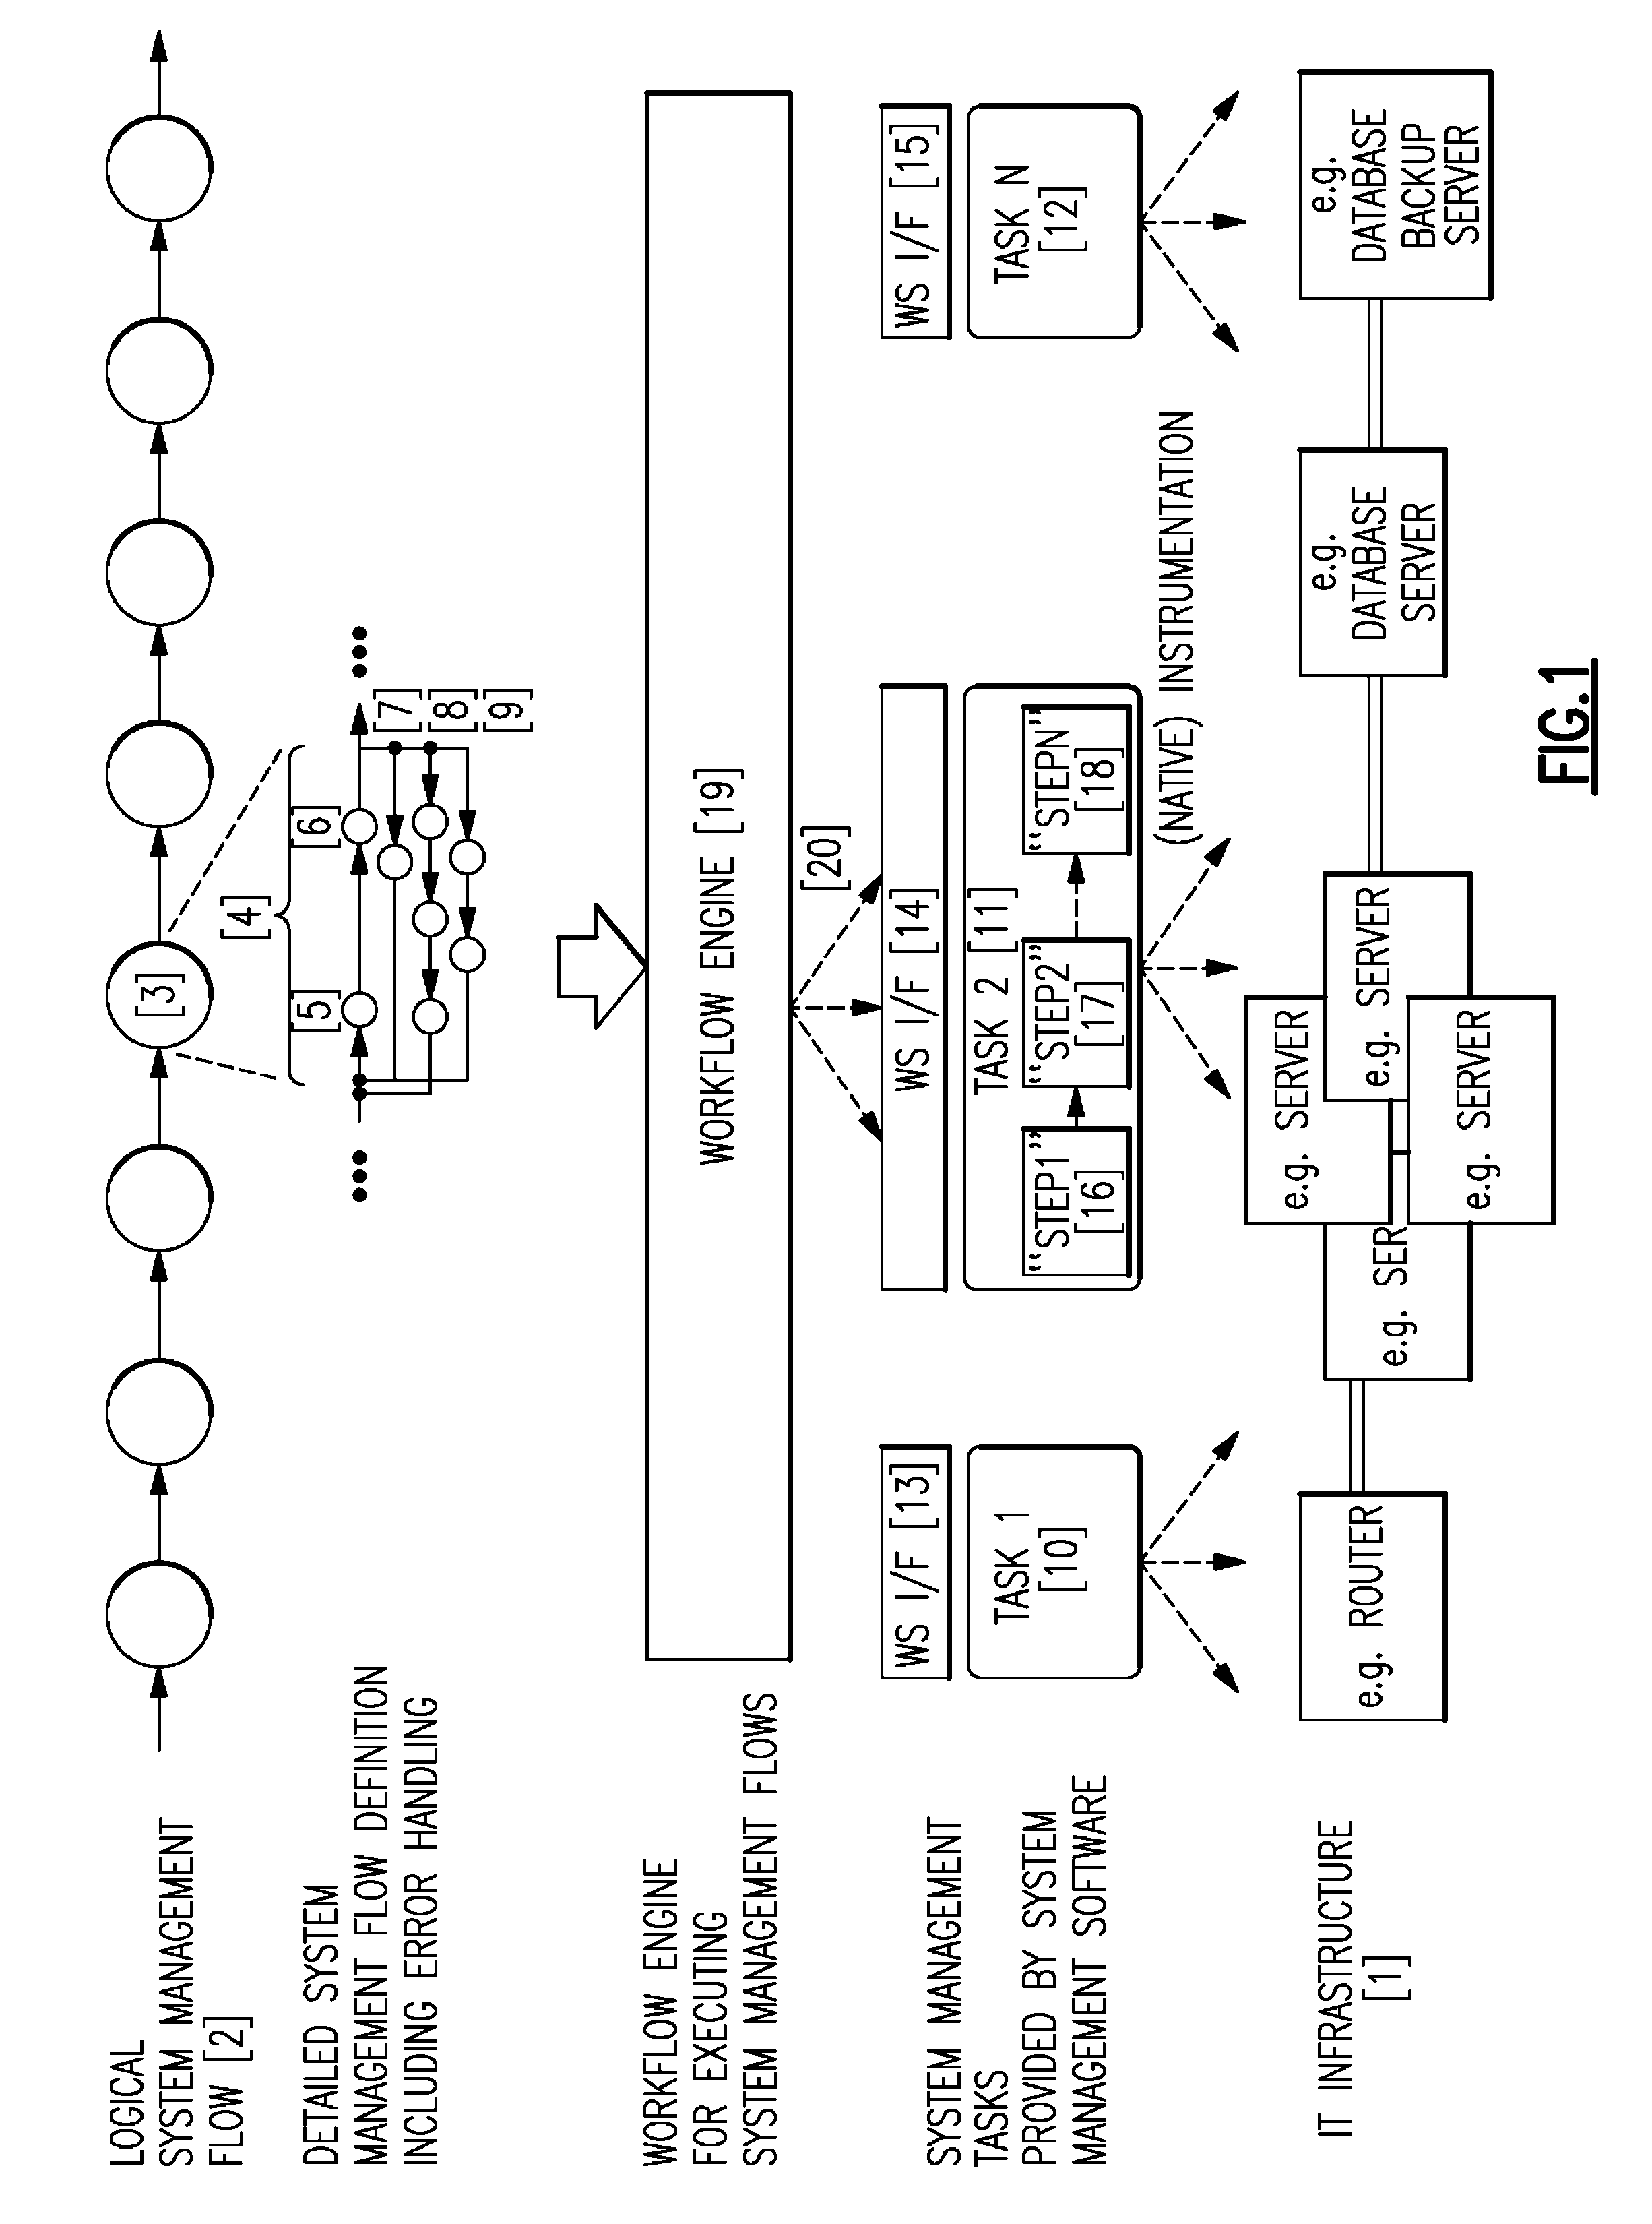 Method and system for automated handling of errors in execution of system management flows consisting of system management tasks